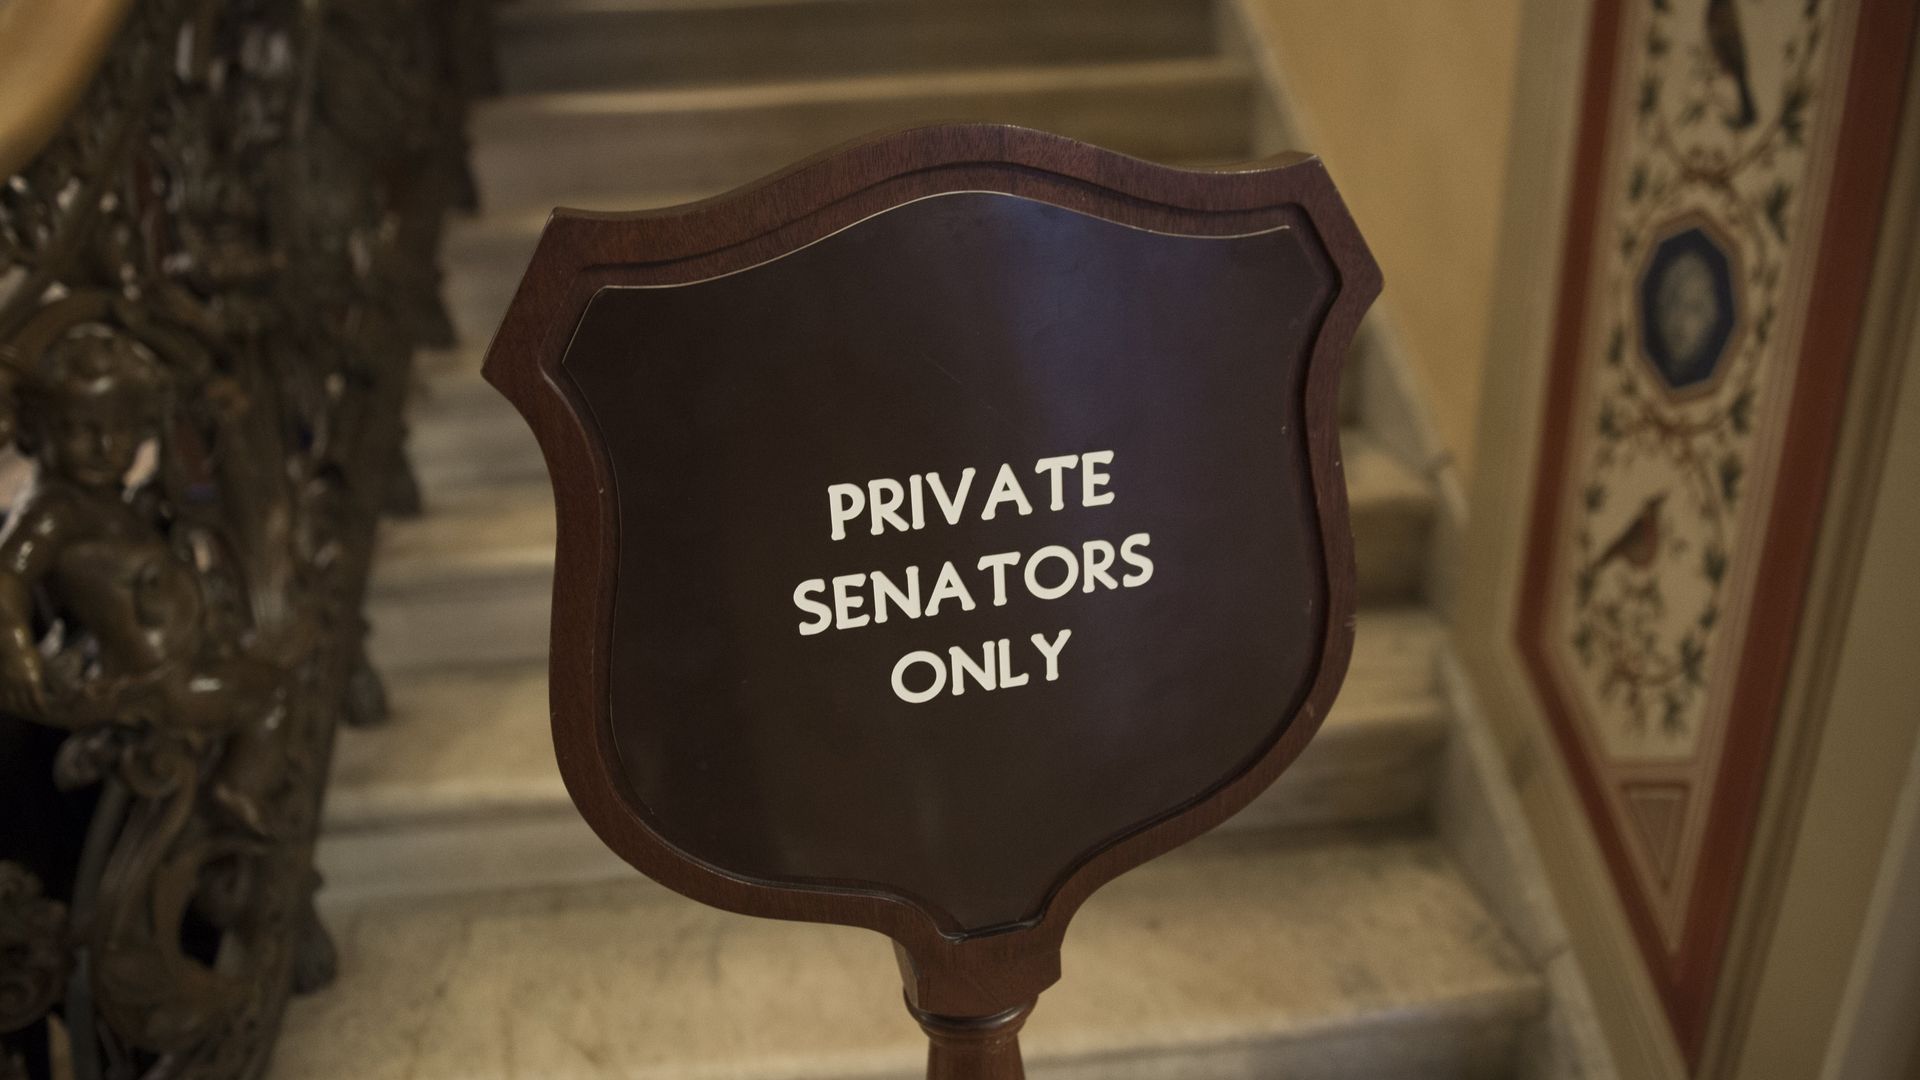 "Senators Only" sign in Capitol stairwell